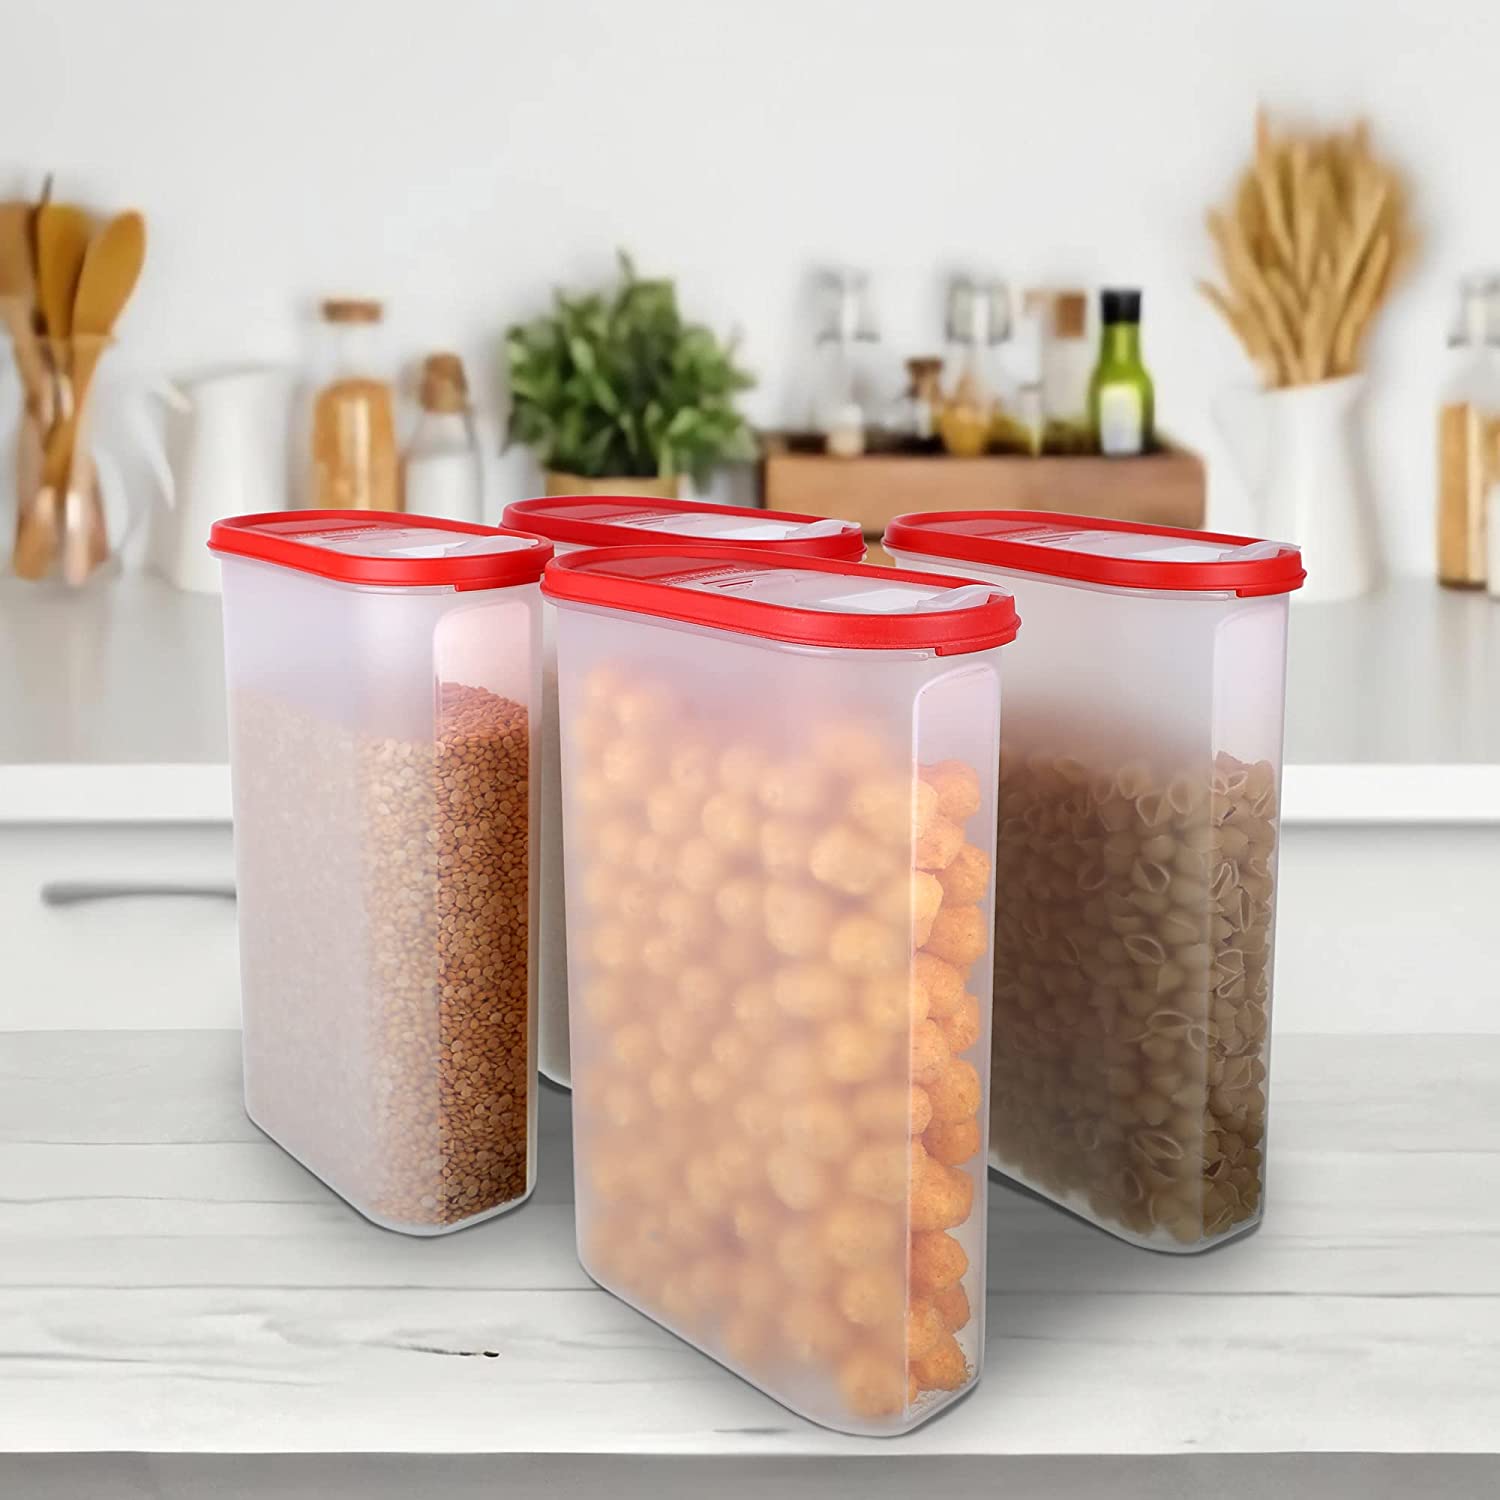 Modular (Free Plain Lids Extra with Each Container)